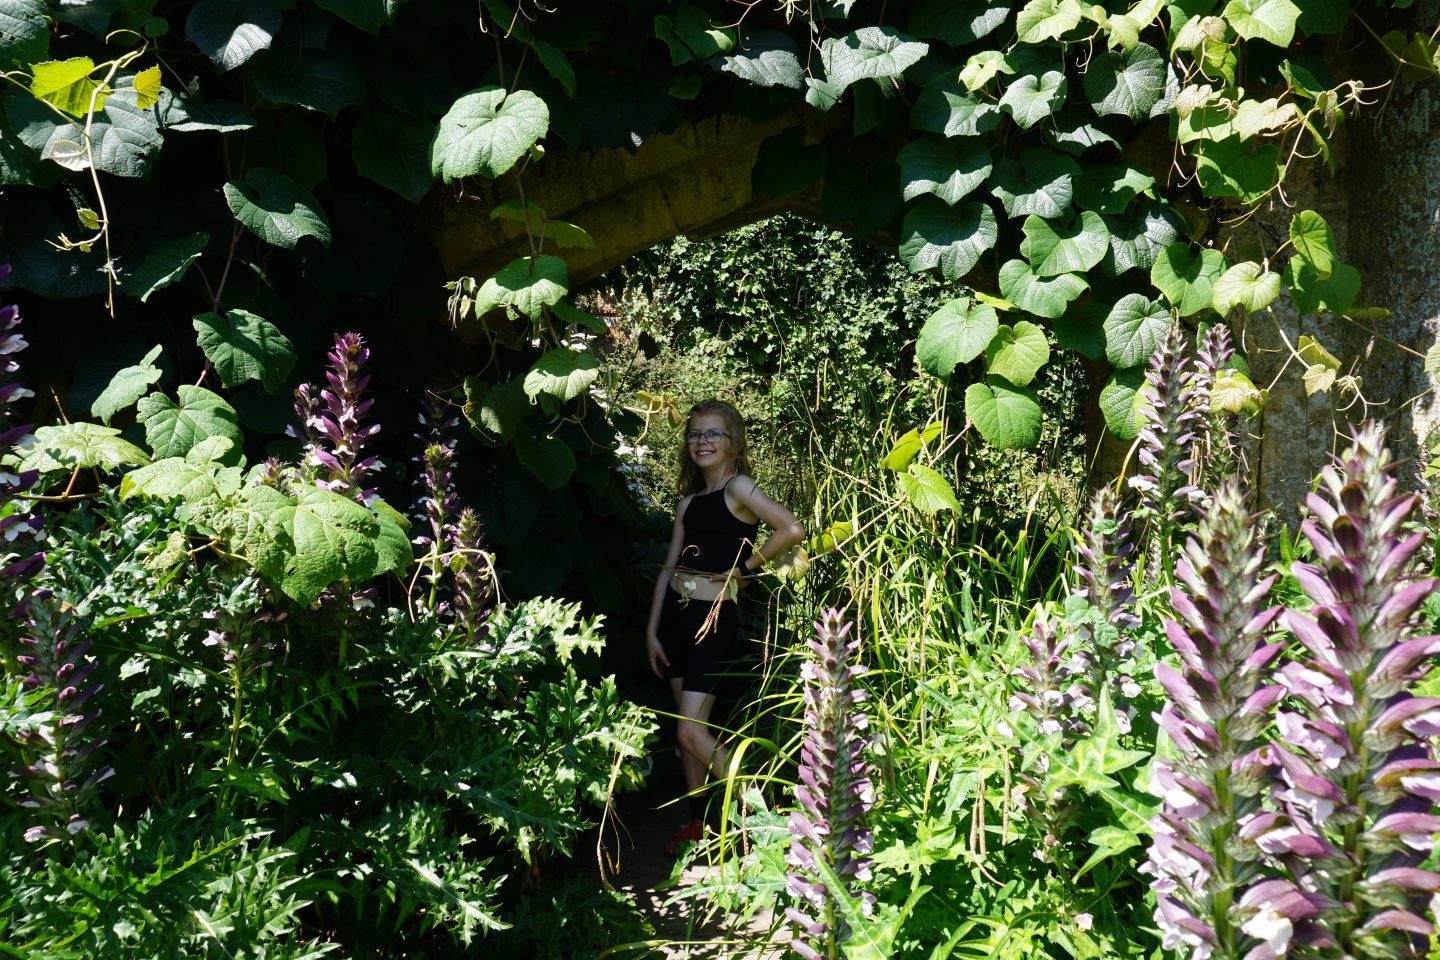 Girl dressed in black in the plants among ruins at Sudeley Castle